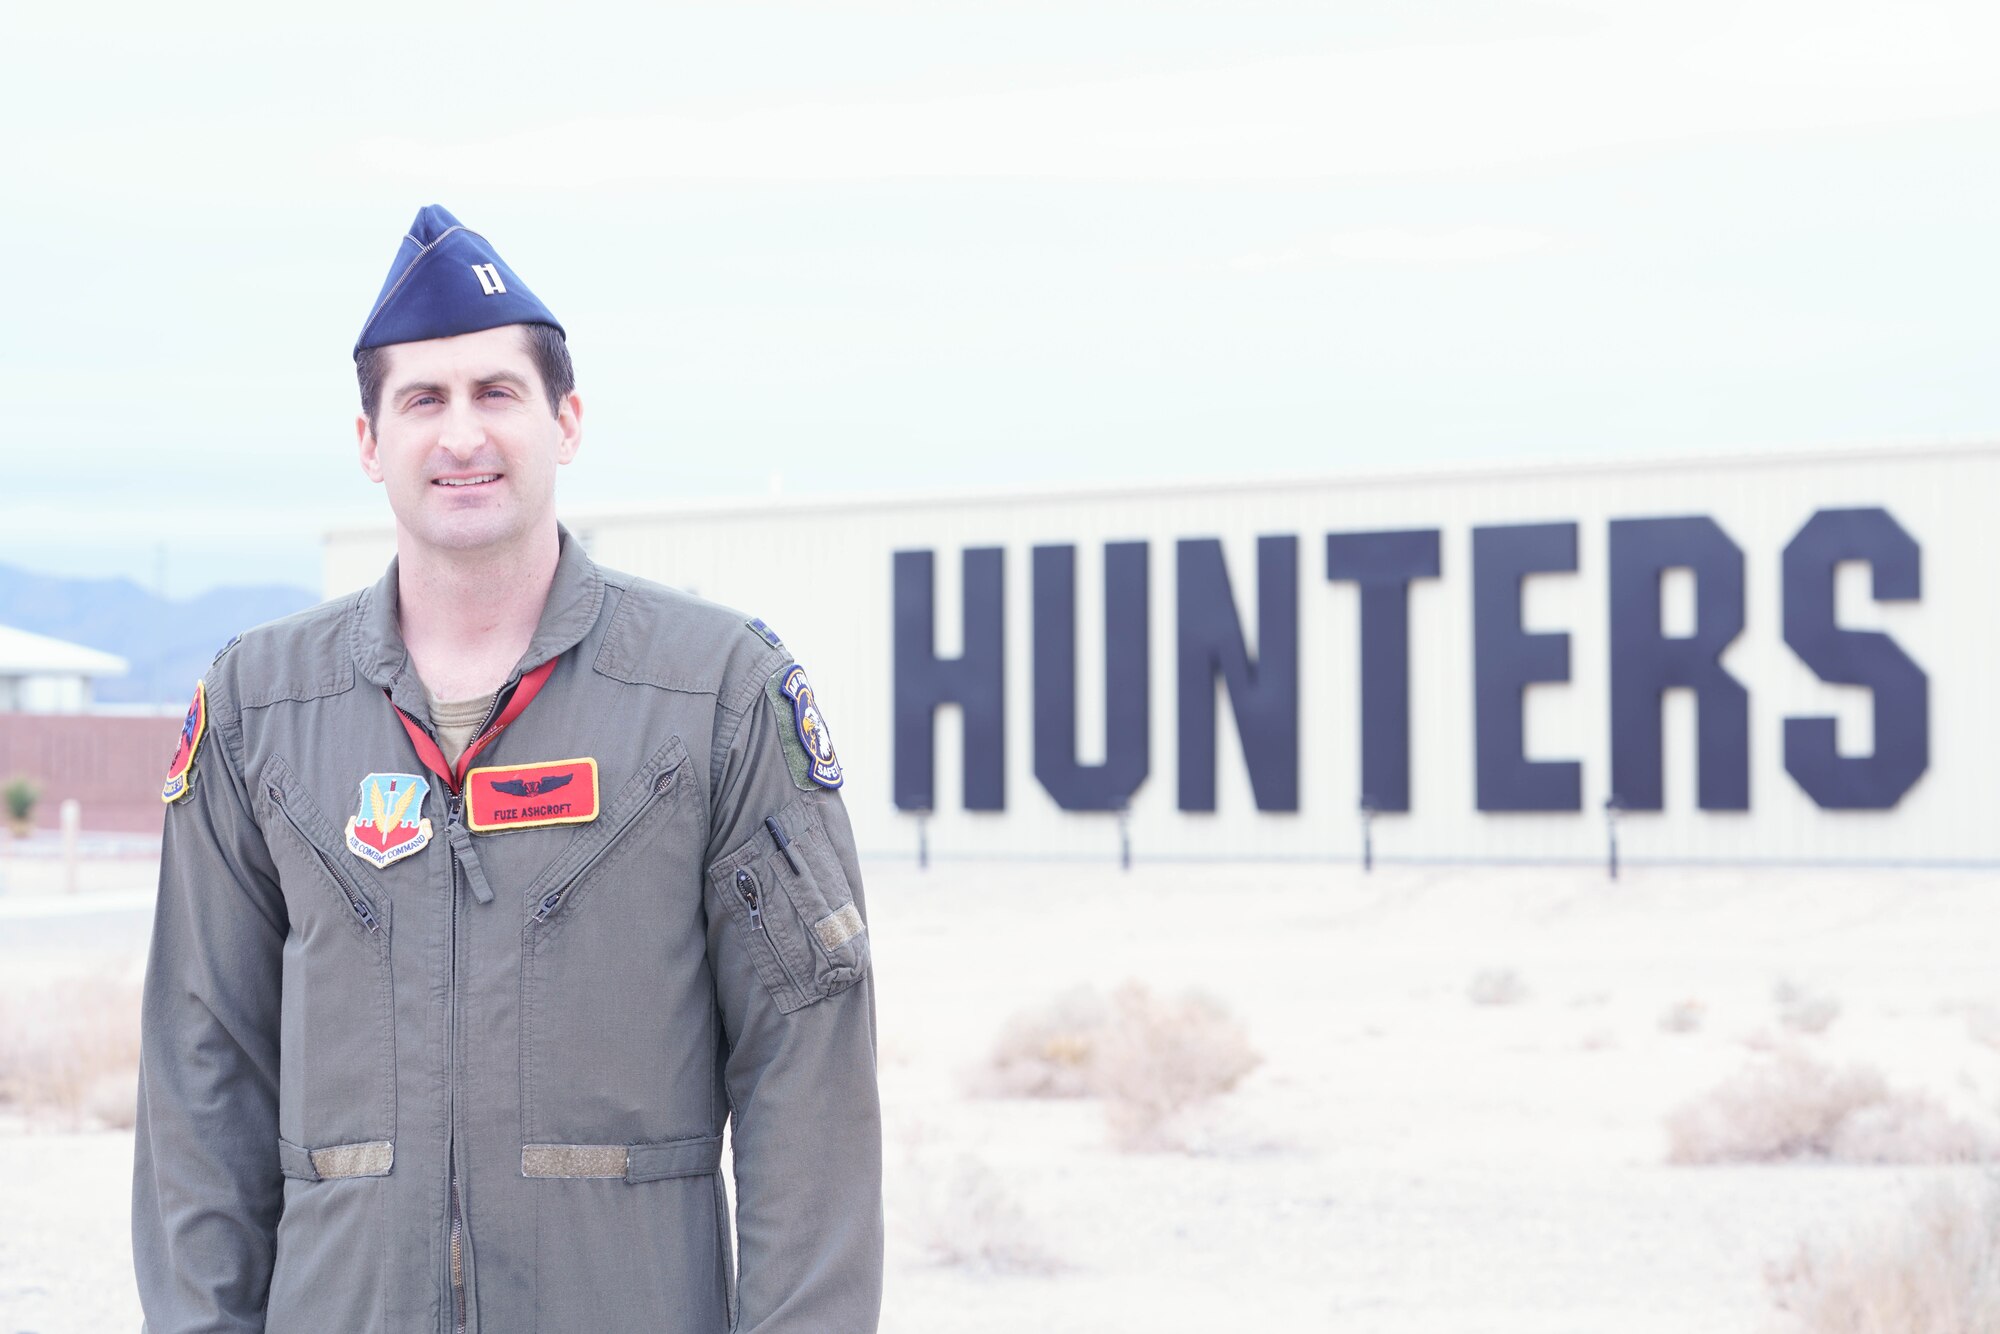 A man in a military flight suit stands in front of a building with the text "Hunters" on the side of it.